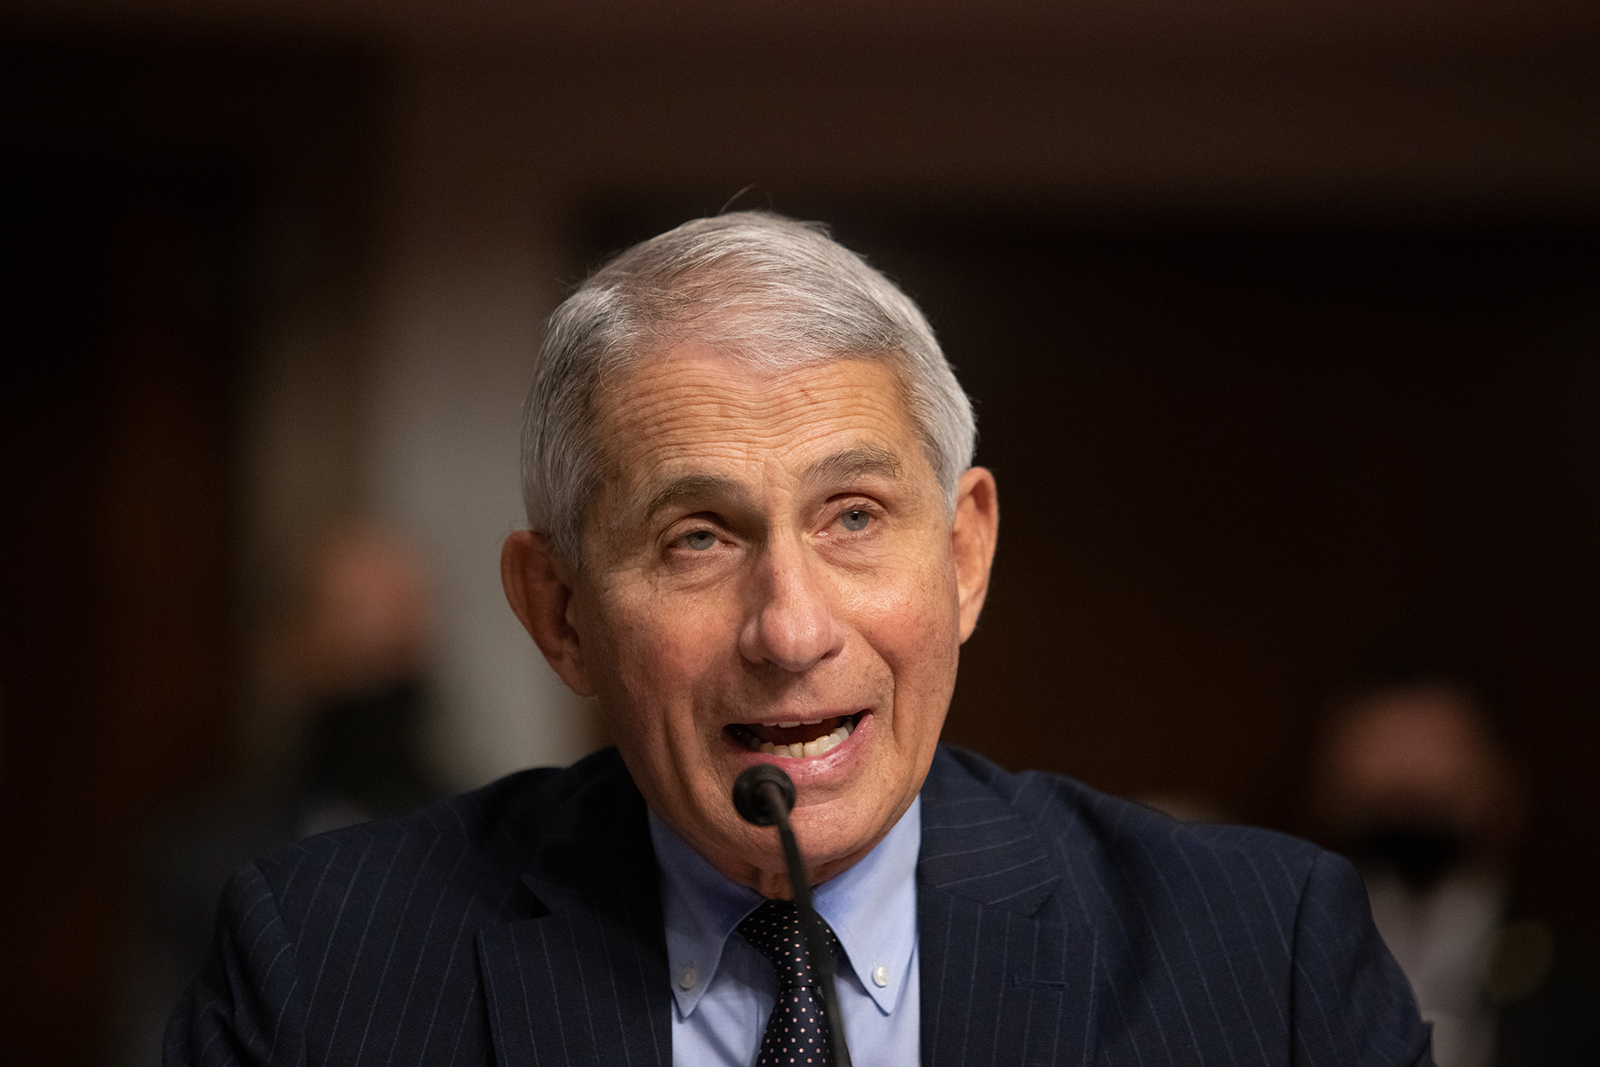 Dr. Anthony Fauci, Director of the National Institute of Allergy and Infectious Diseases at the National Institutes of Health, testifies during a US Senate Senate Health, Education, Labor, and Pensions Committee hearing to examine Covid-19, in Washington, DC, on September 23